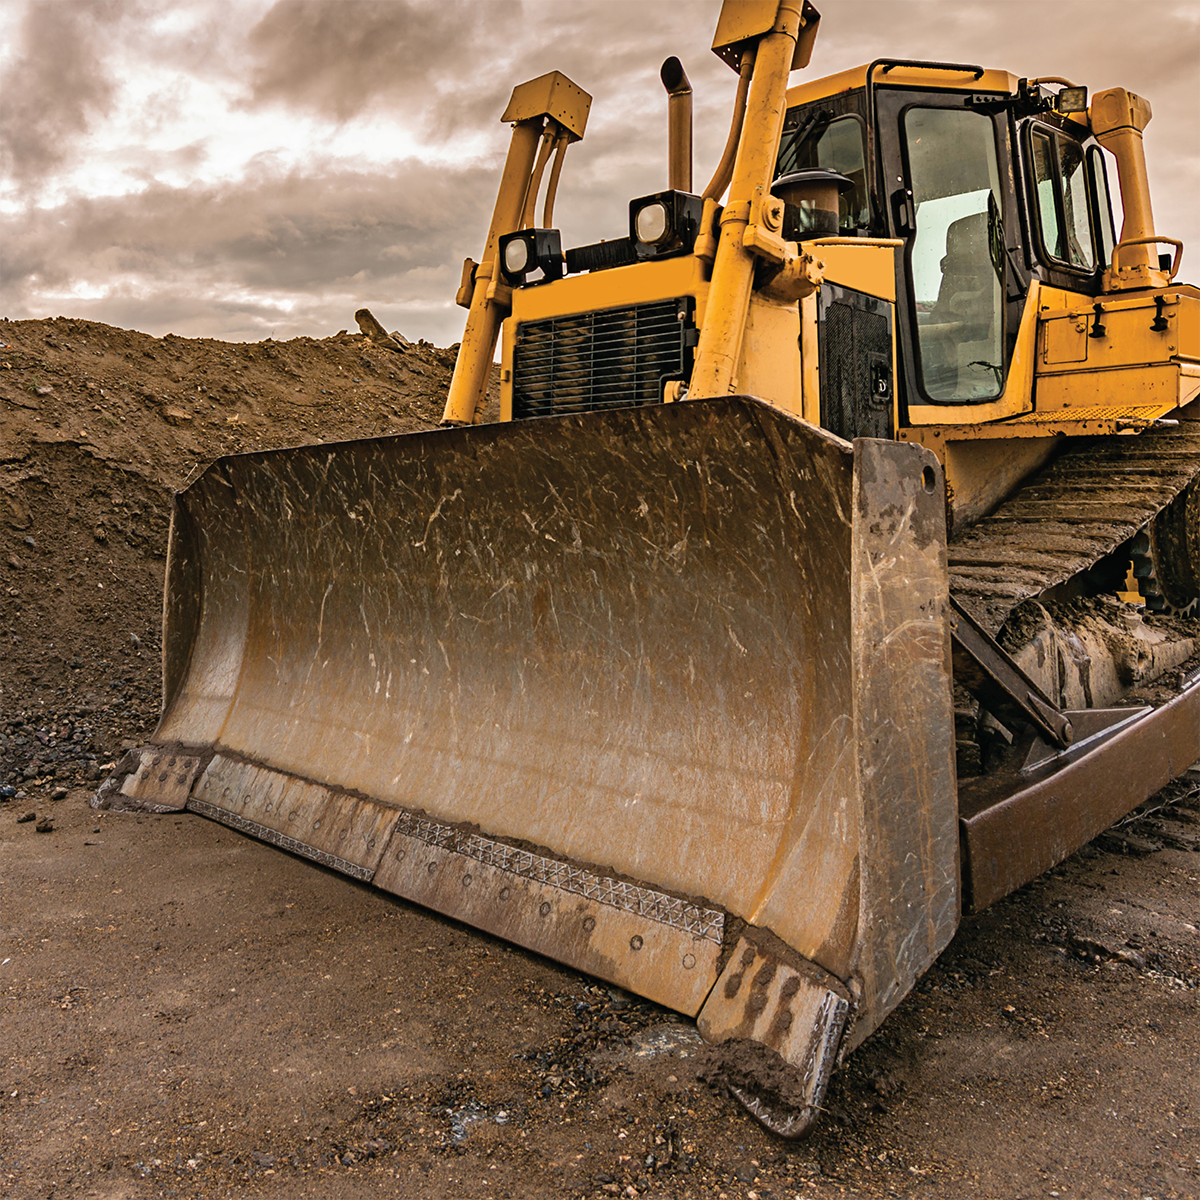 Bulldozer moving dirt for road construction